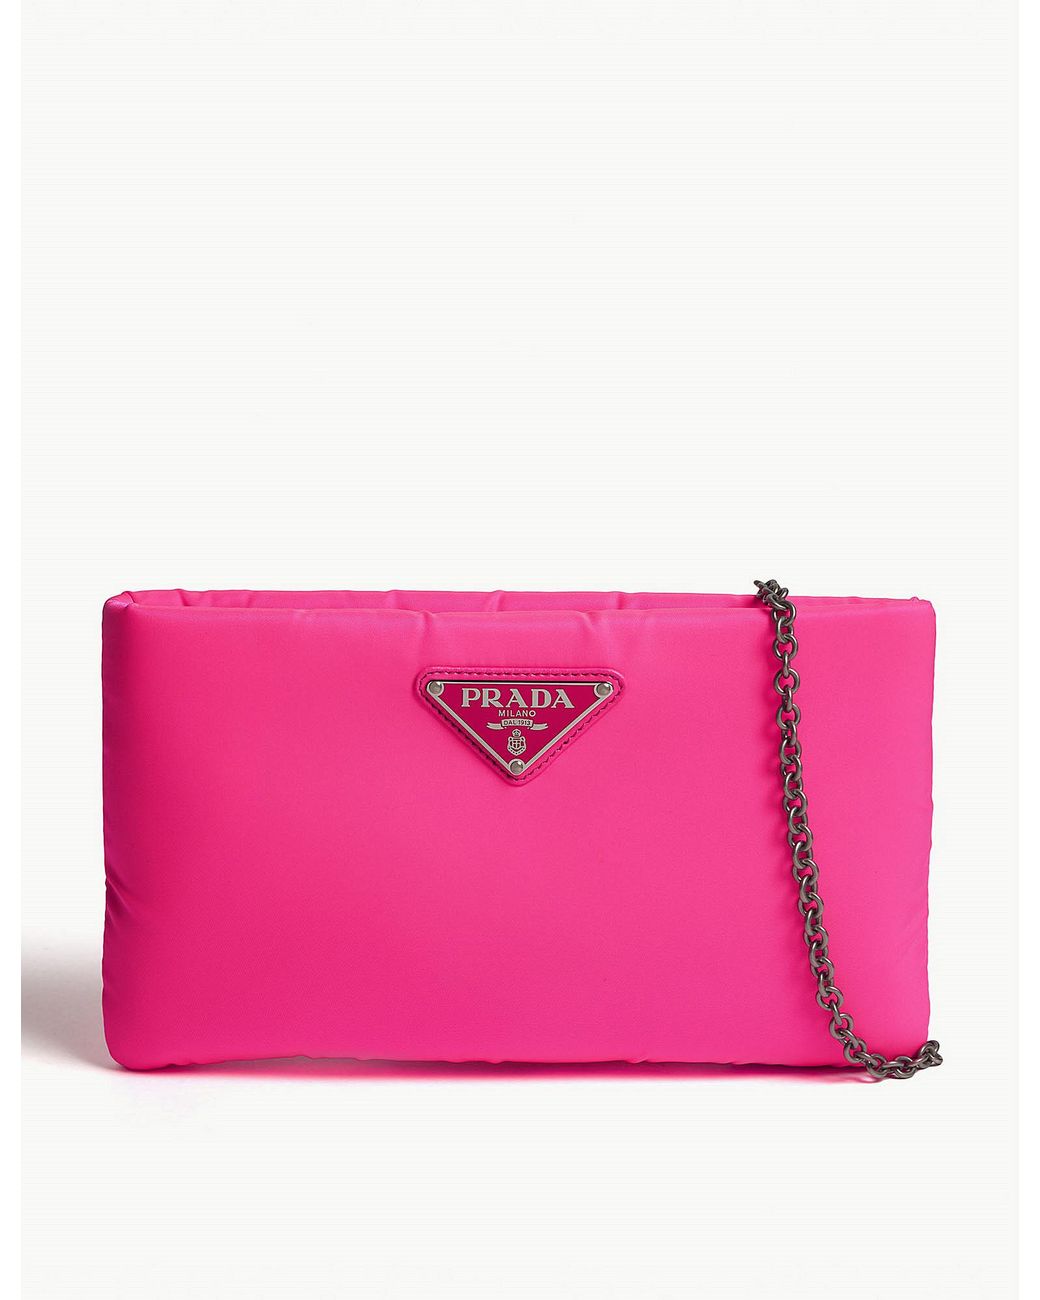 Prada Fluo Large Padded Nylon Clutch in Pink | Lyst